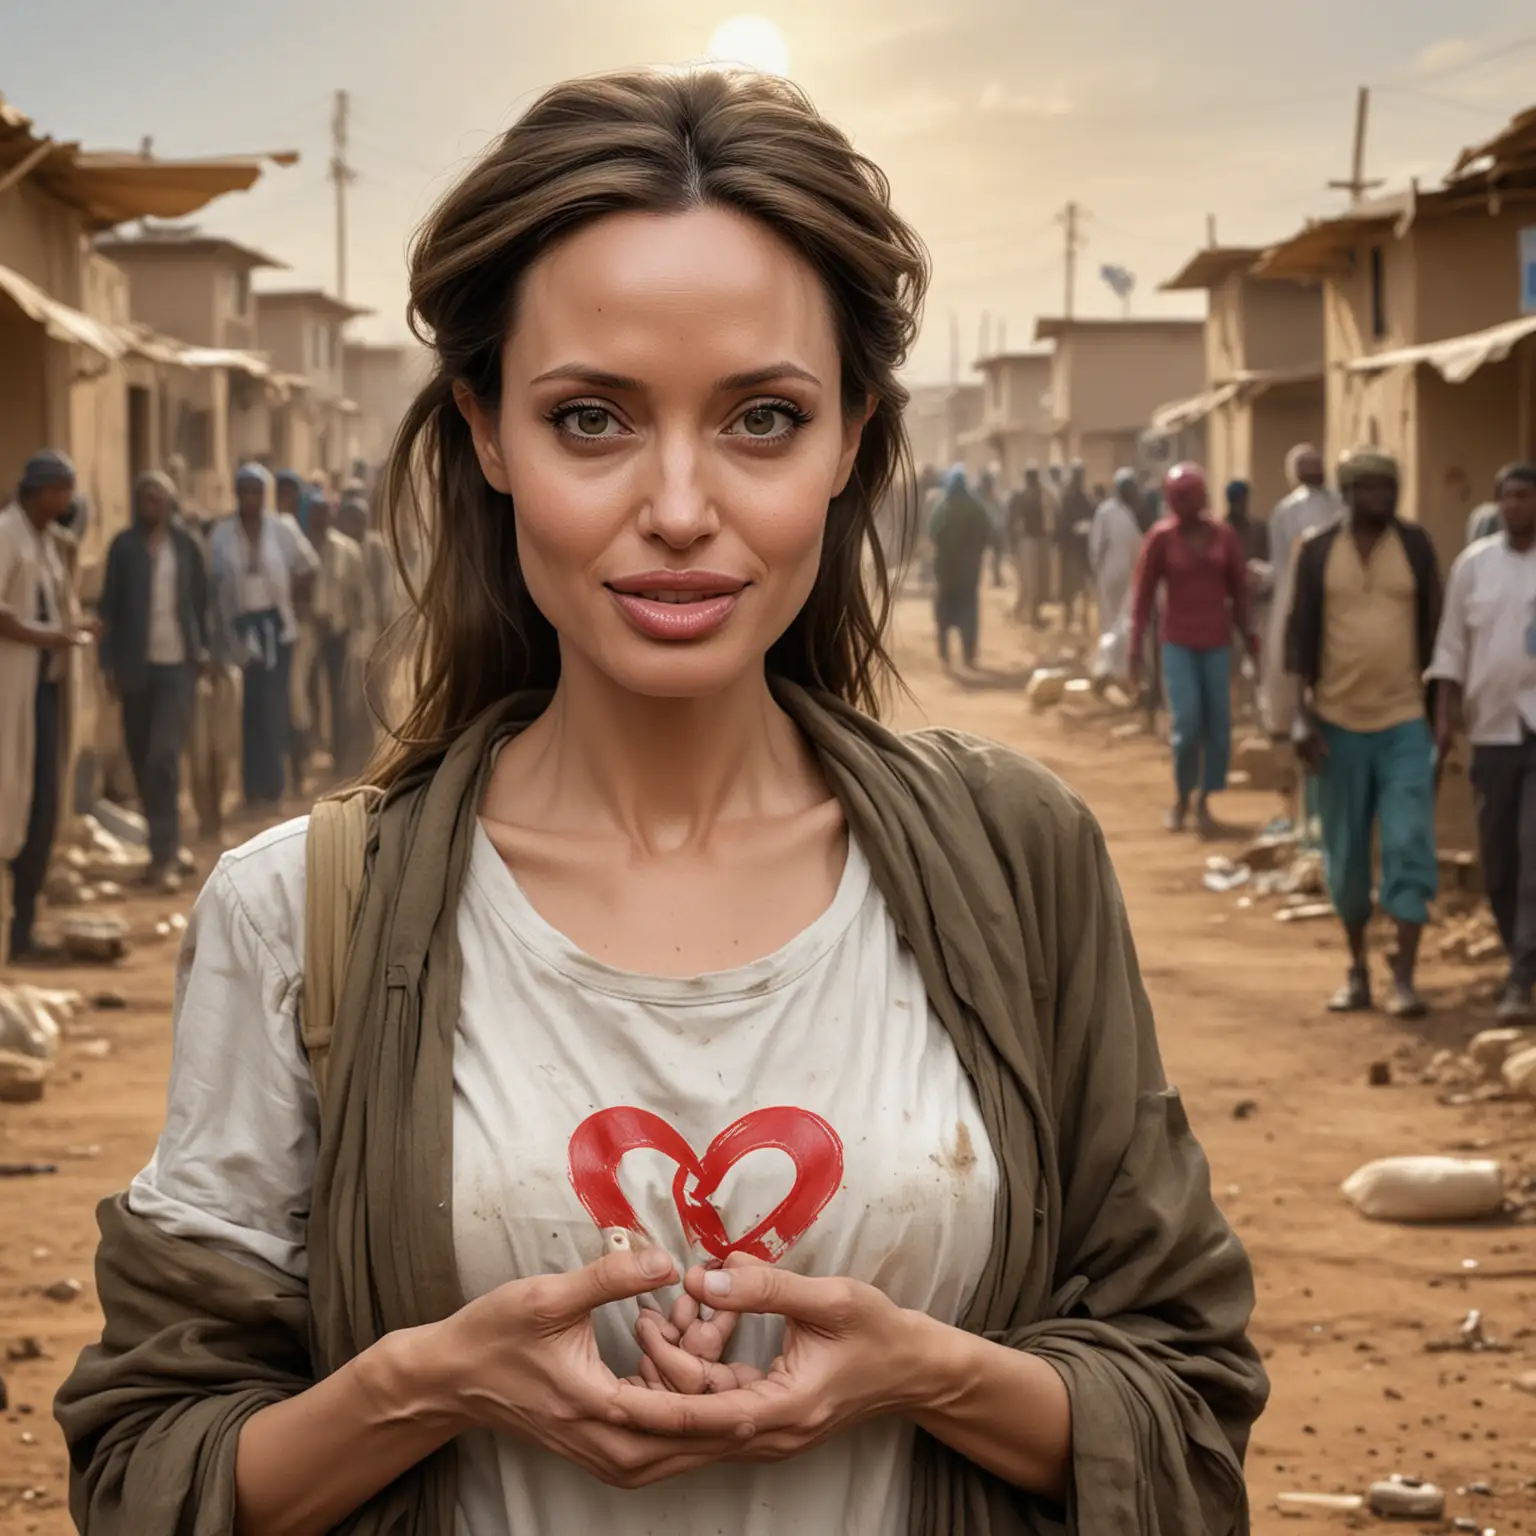 Angelina Jolie Humanitarian Icon Holding Heart Symbol in Refugee Camp